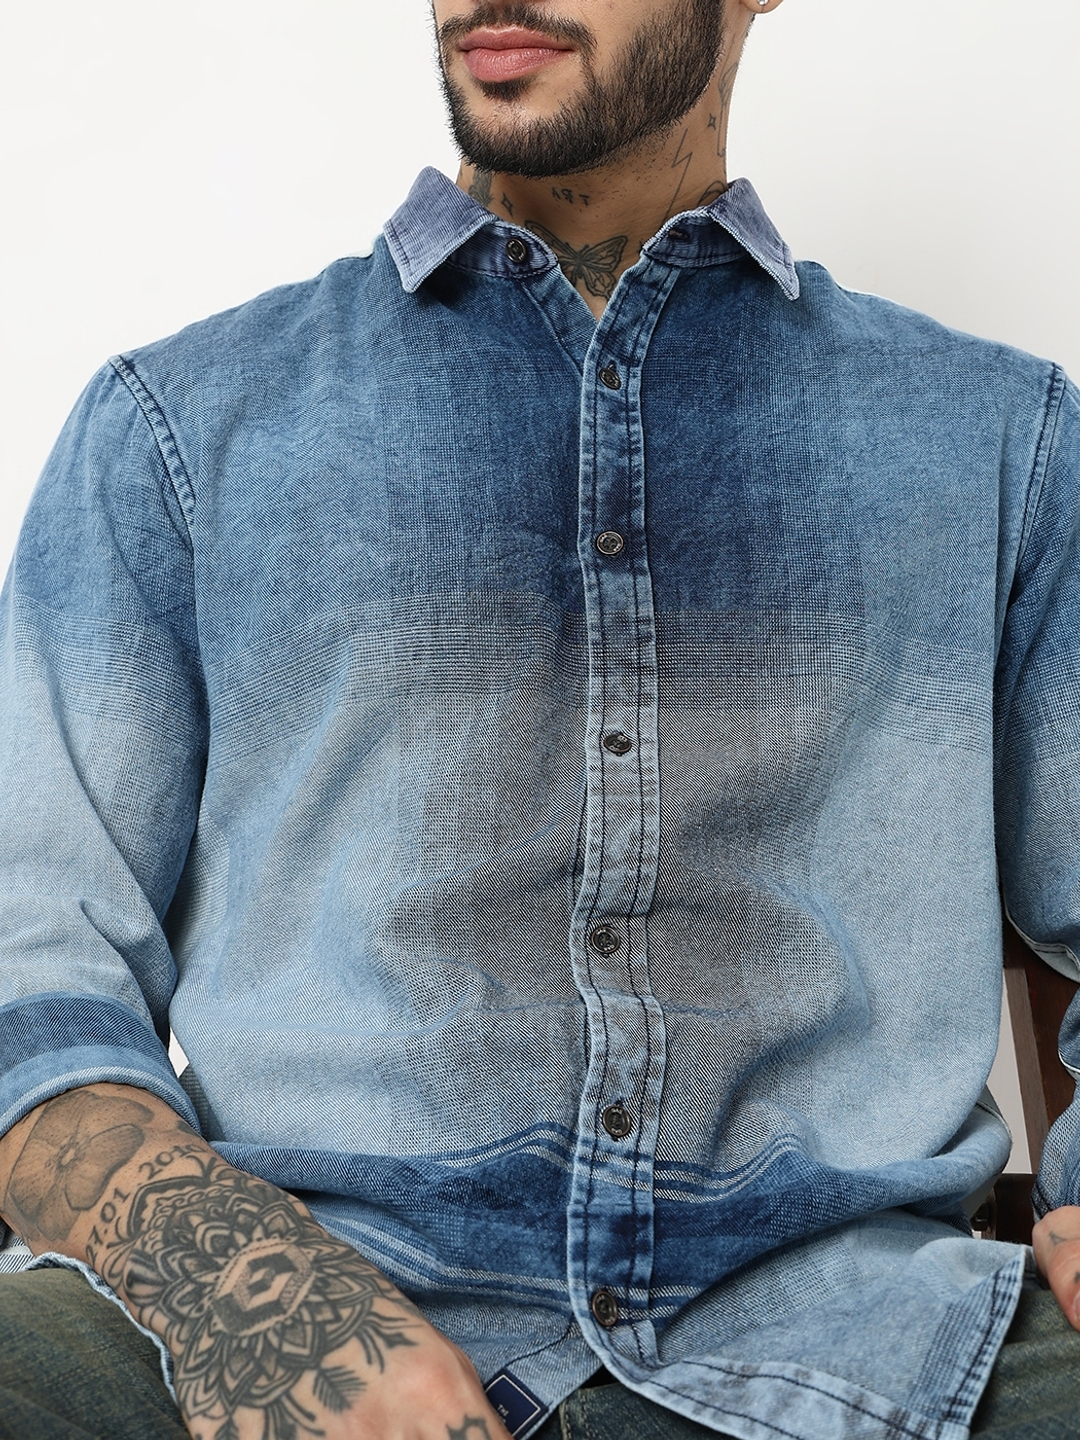 Carisma check shirt with denim details for real men with format-nttc.com.vn